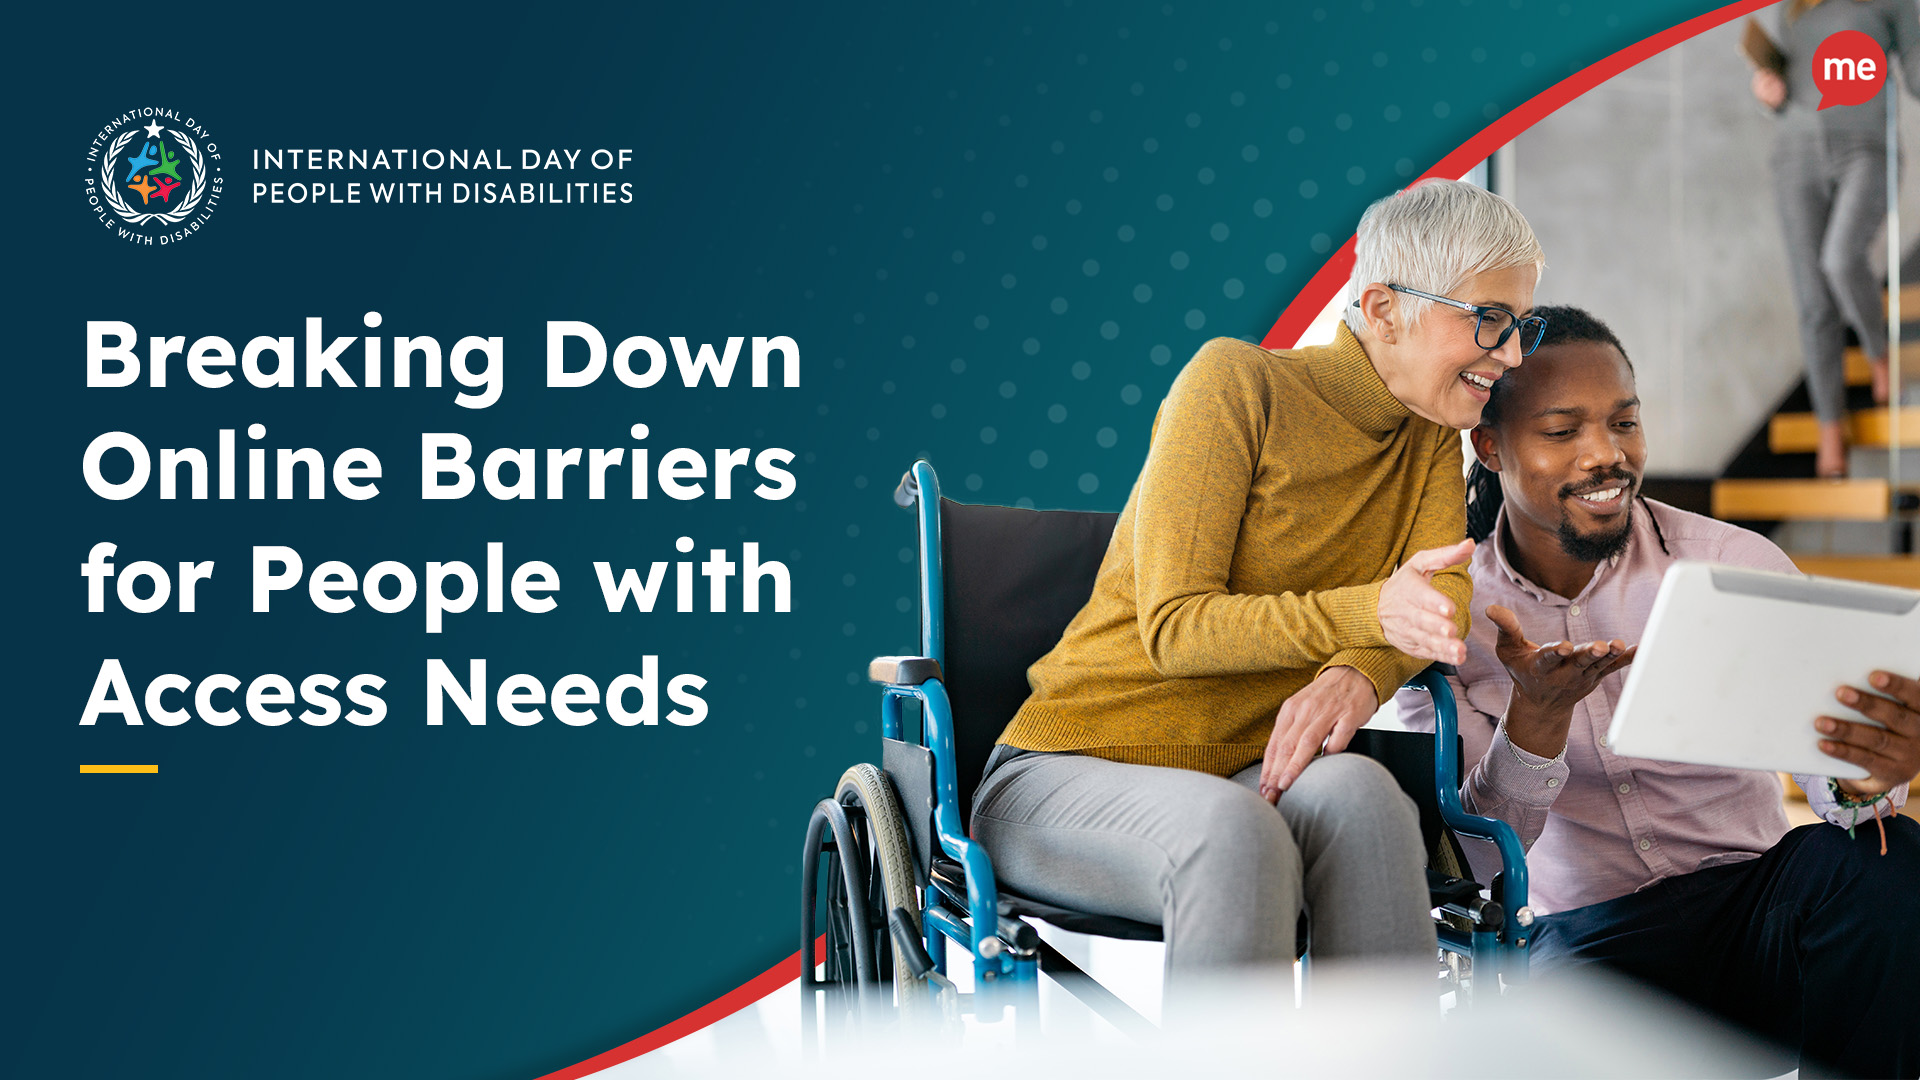 Text: Breaking Down Online Barriers for People with Access Needs with an image of a man showing a woman in a wheelchair something on his tablet